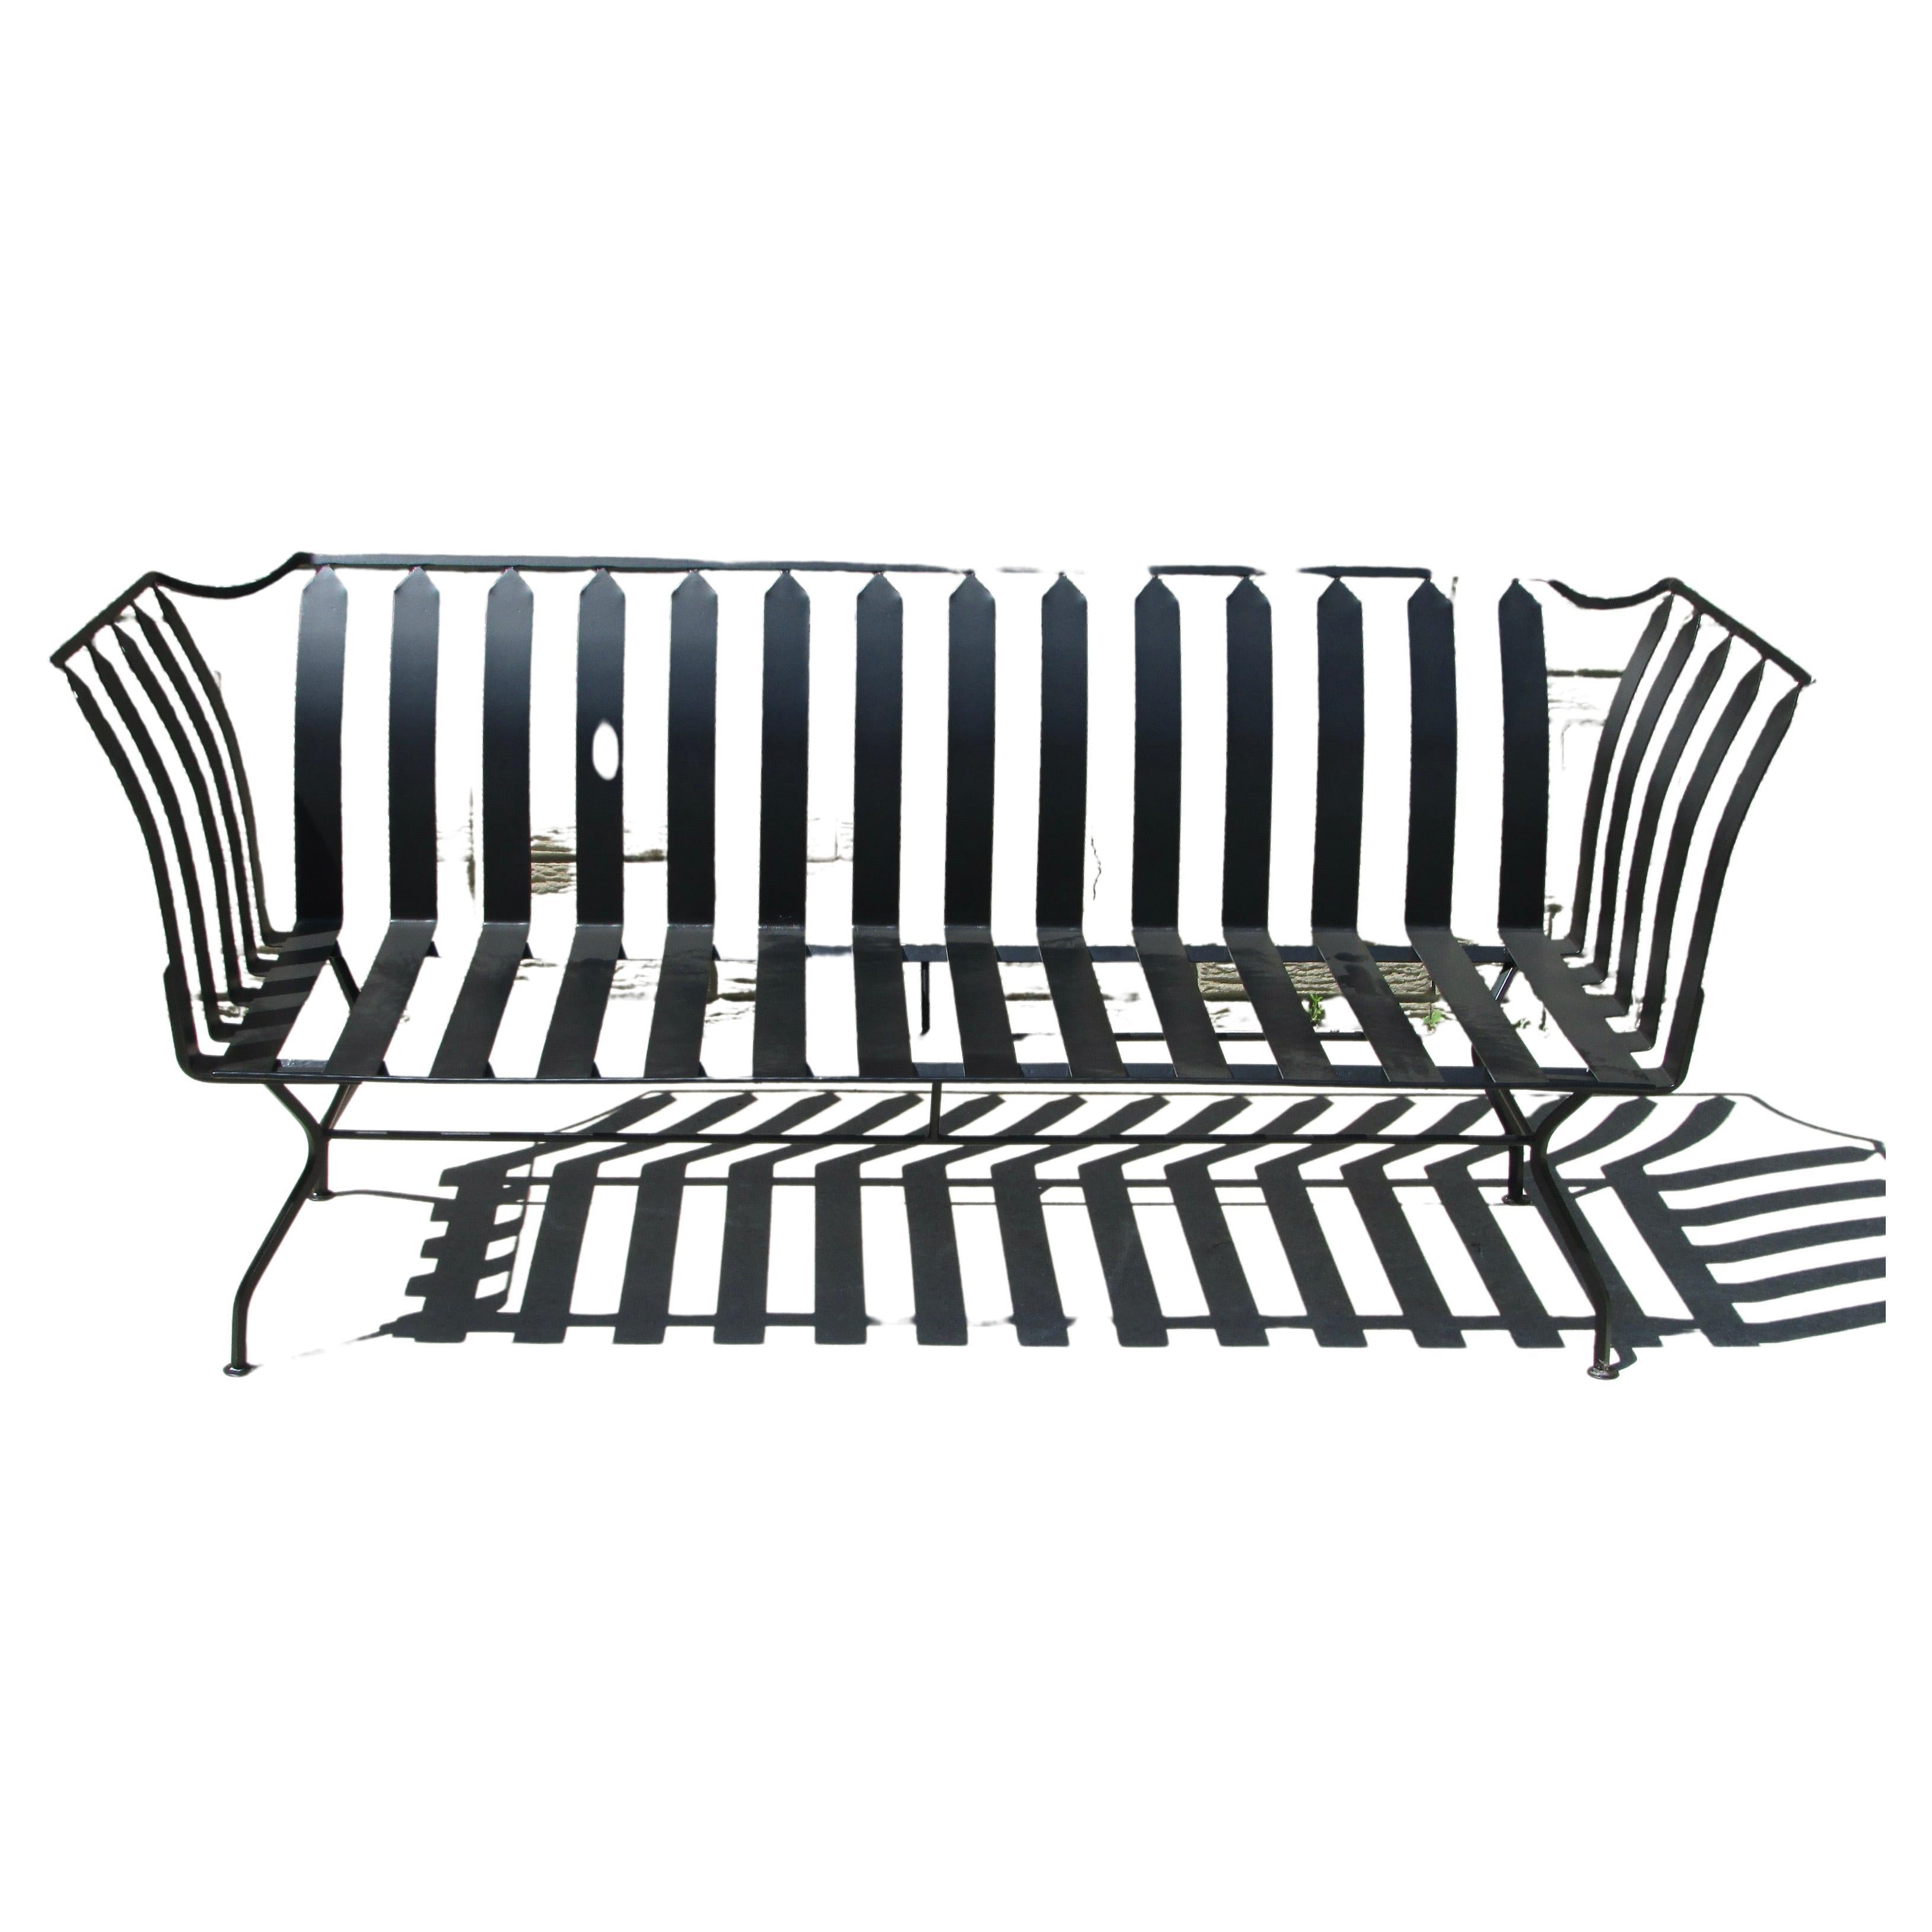 Classically styled modernist settee. Square stock wrought iron frame with flat band steel cushion supports. Salterini as manufacturer is my best attribution guess. Just over 5 feet wide, seat height twelve inches without cushion as shown. Settee has